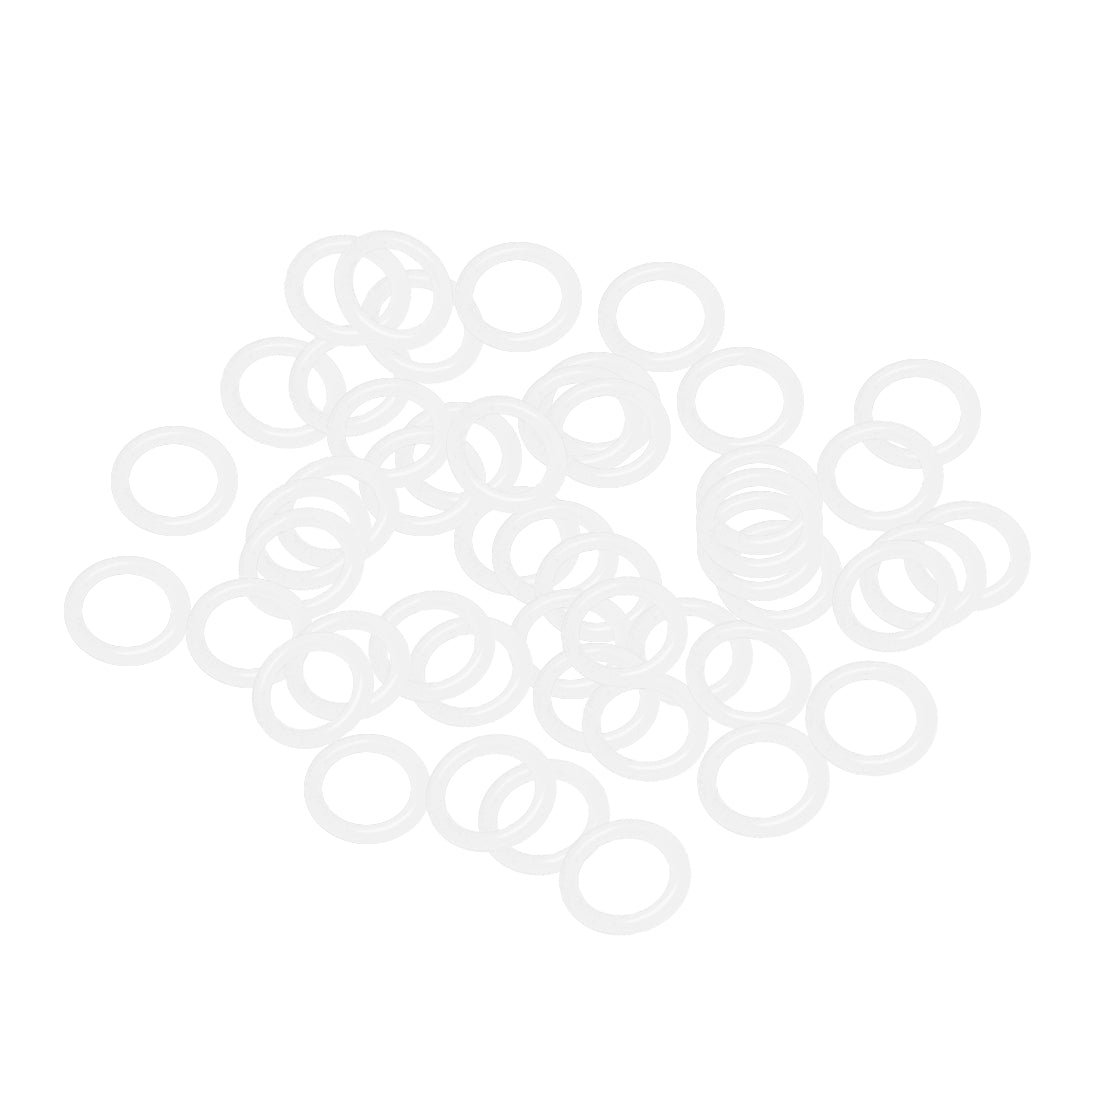 uxcell Uxcell Silicone O-Rings 16mm OD, 11.2mm ID, 2.4mm Width, Seal Gasket White 50Pcs